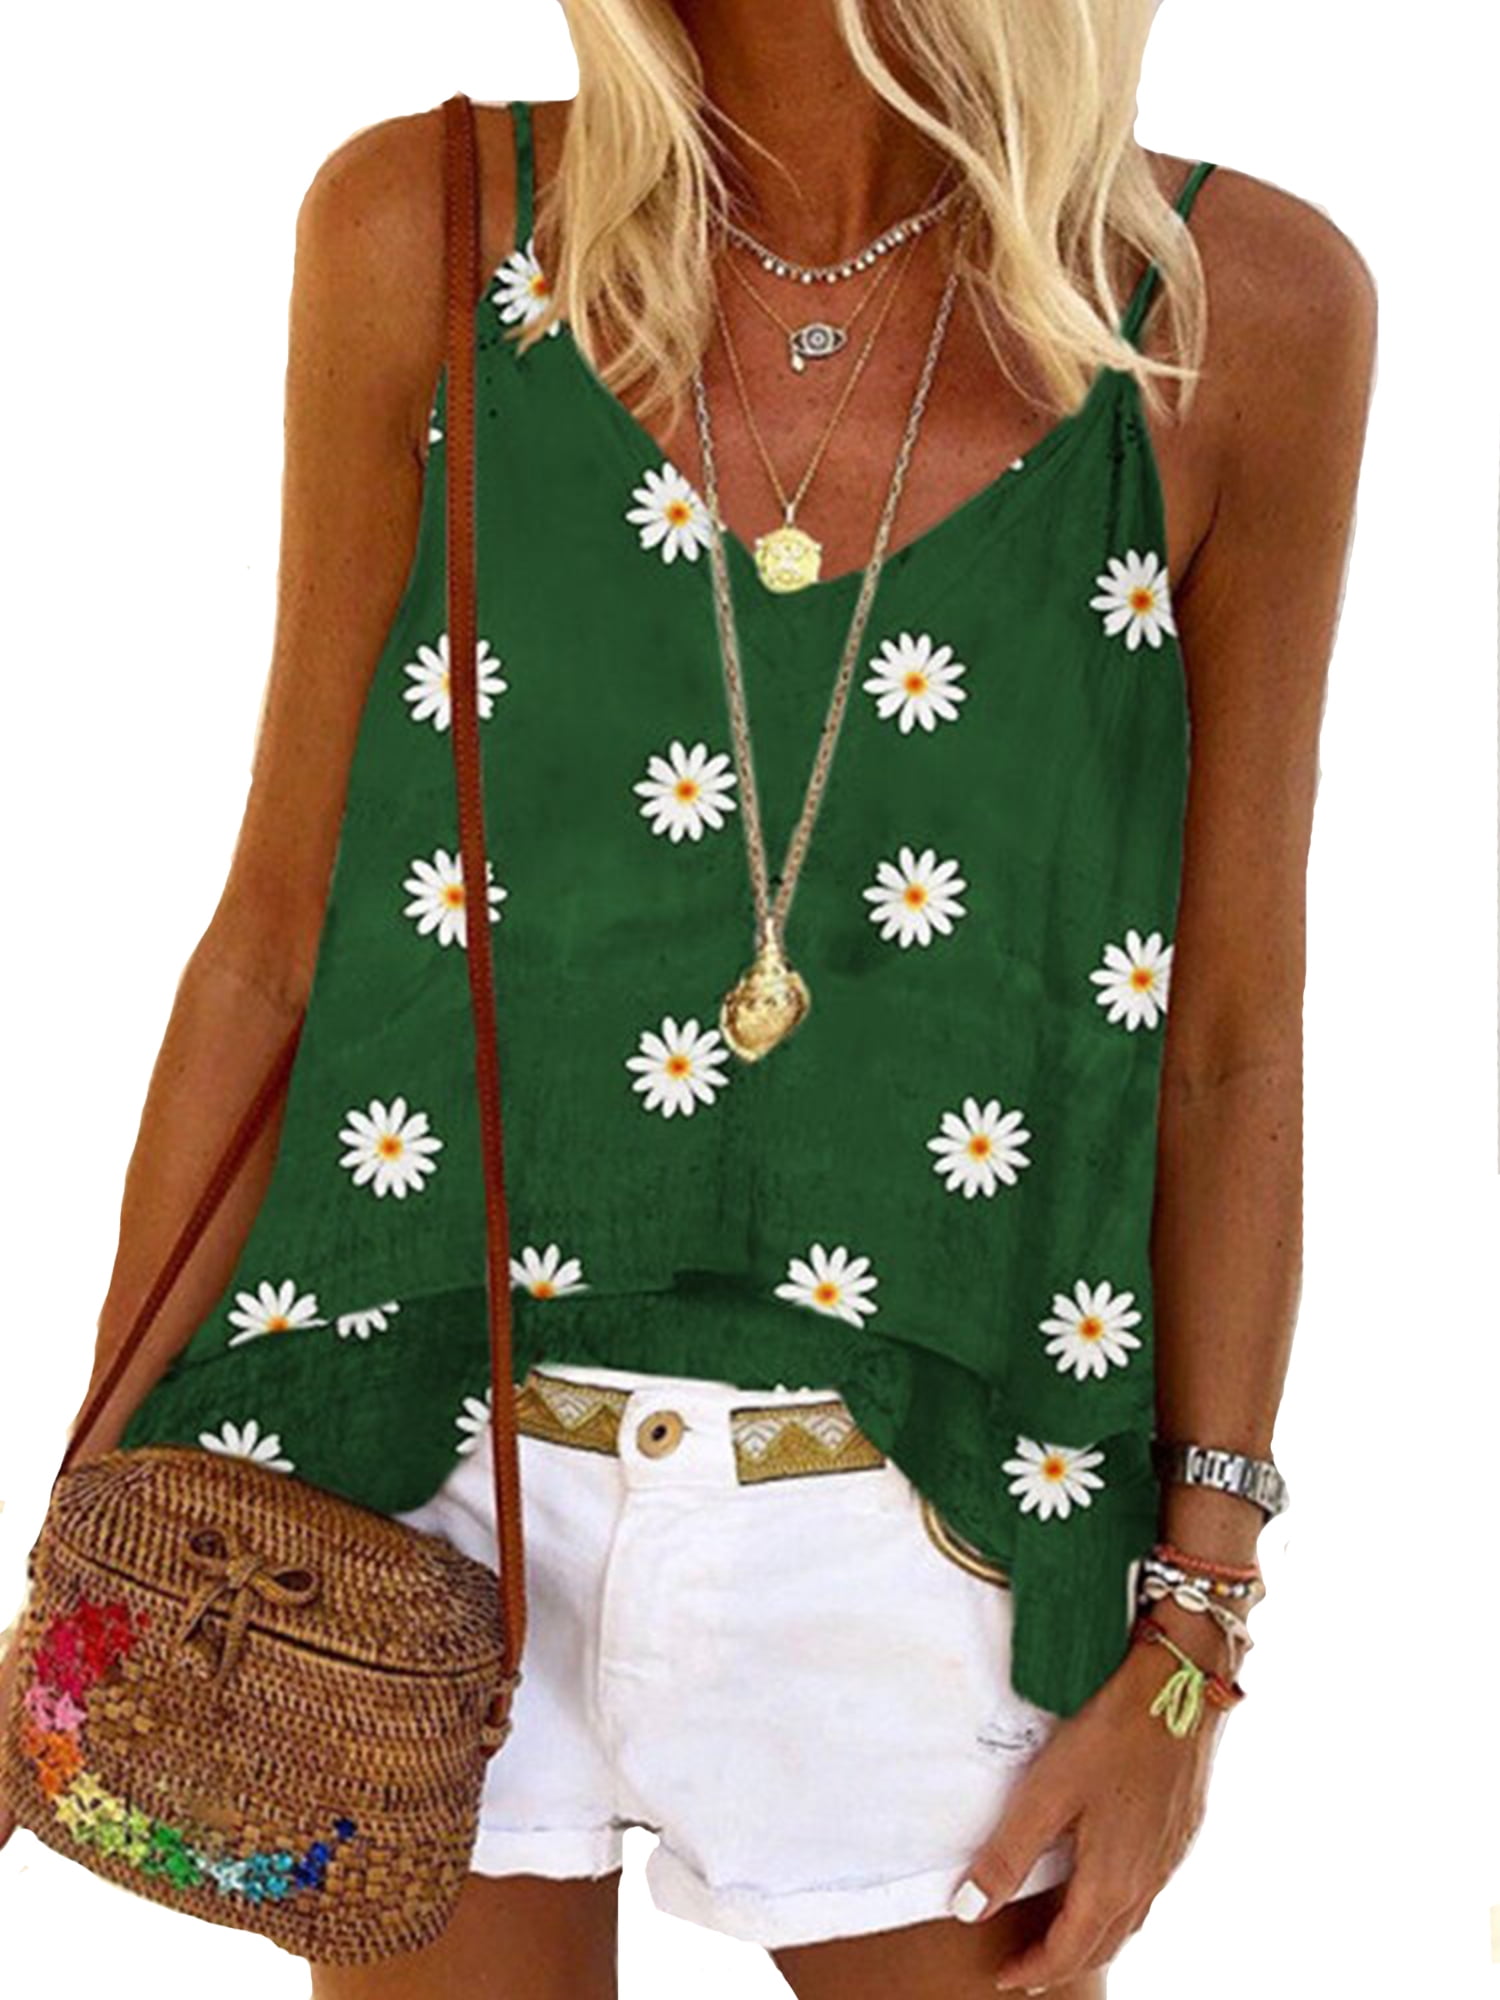 Women Summer Strappy Tank Vest Top Casual Sleeveless Blouse Tops T-Shirt Cactus 